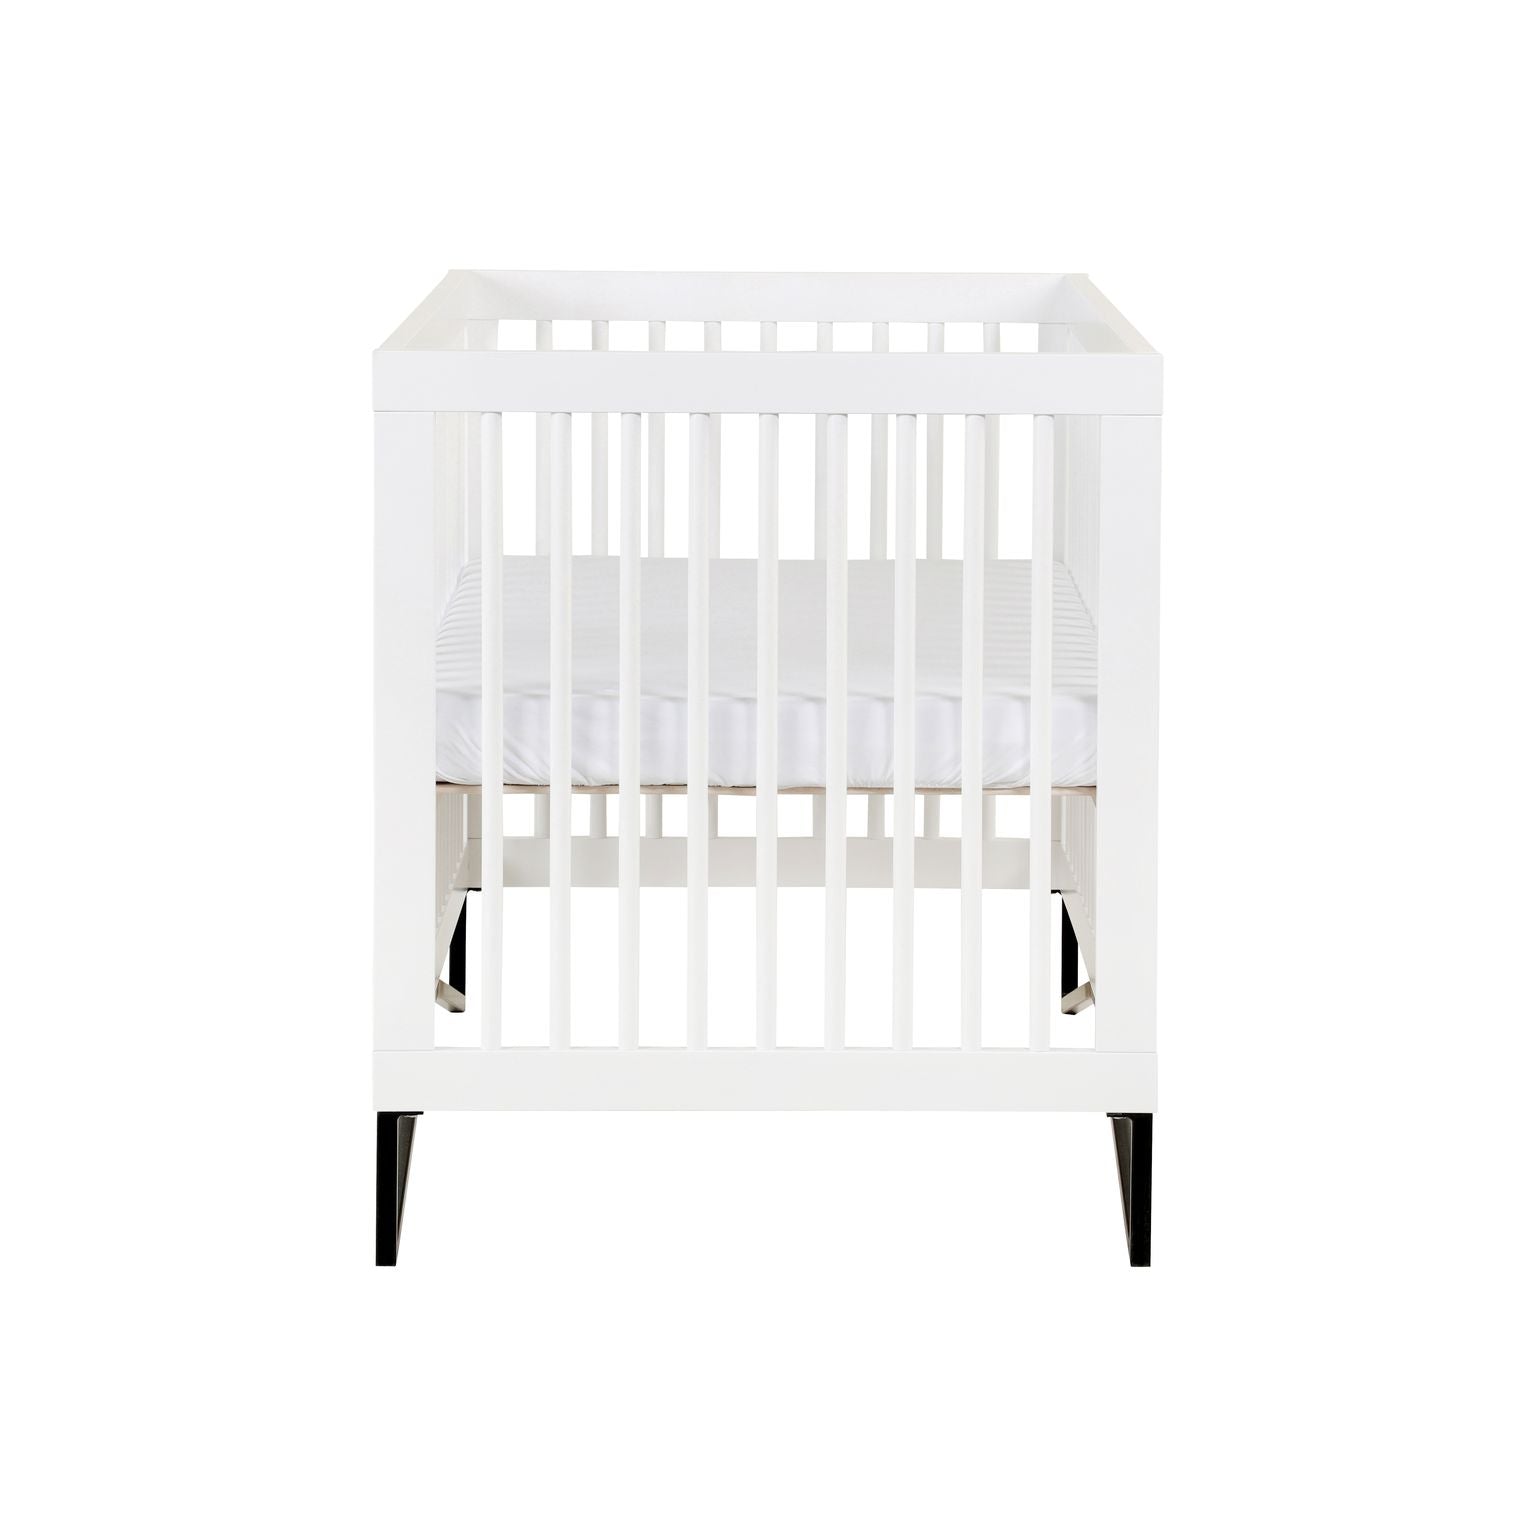 Mega babies' dadada Convertible Crib, is perfect for your growing baby.